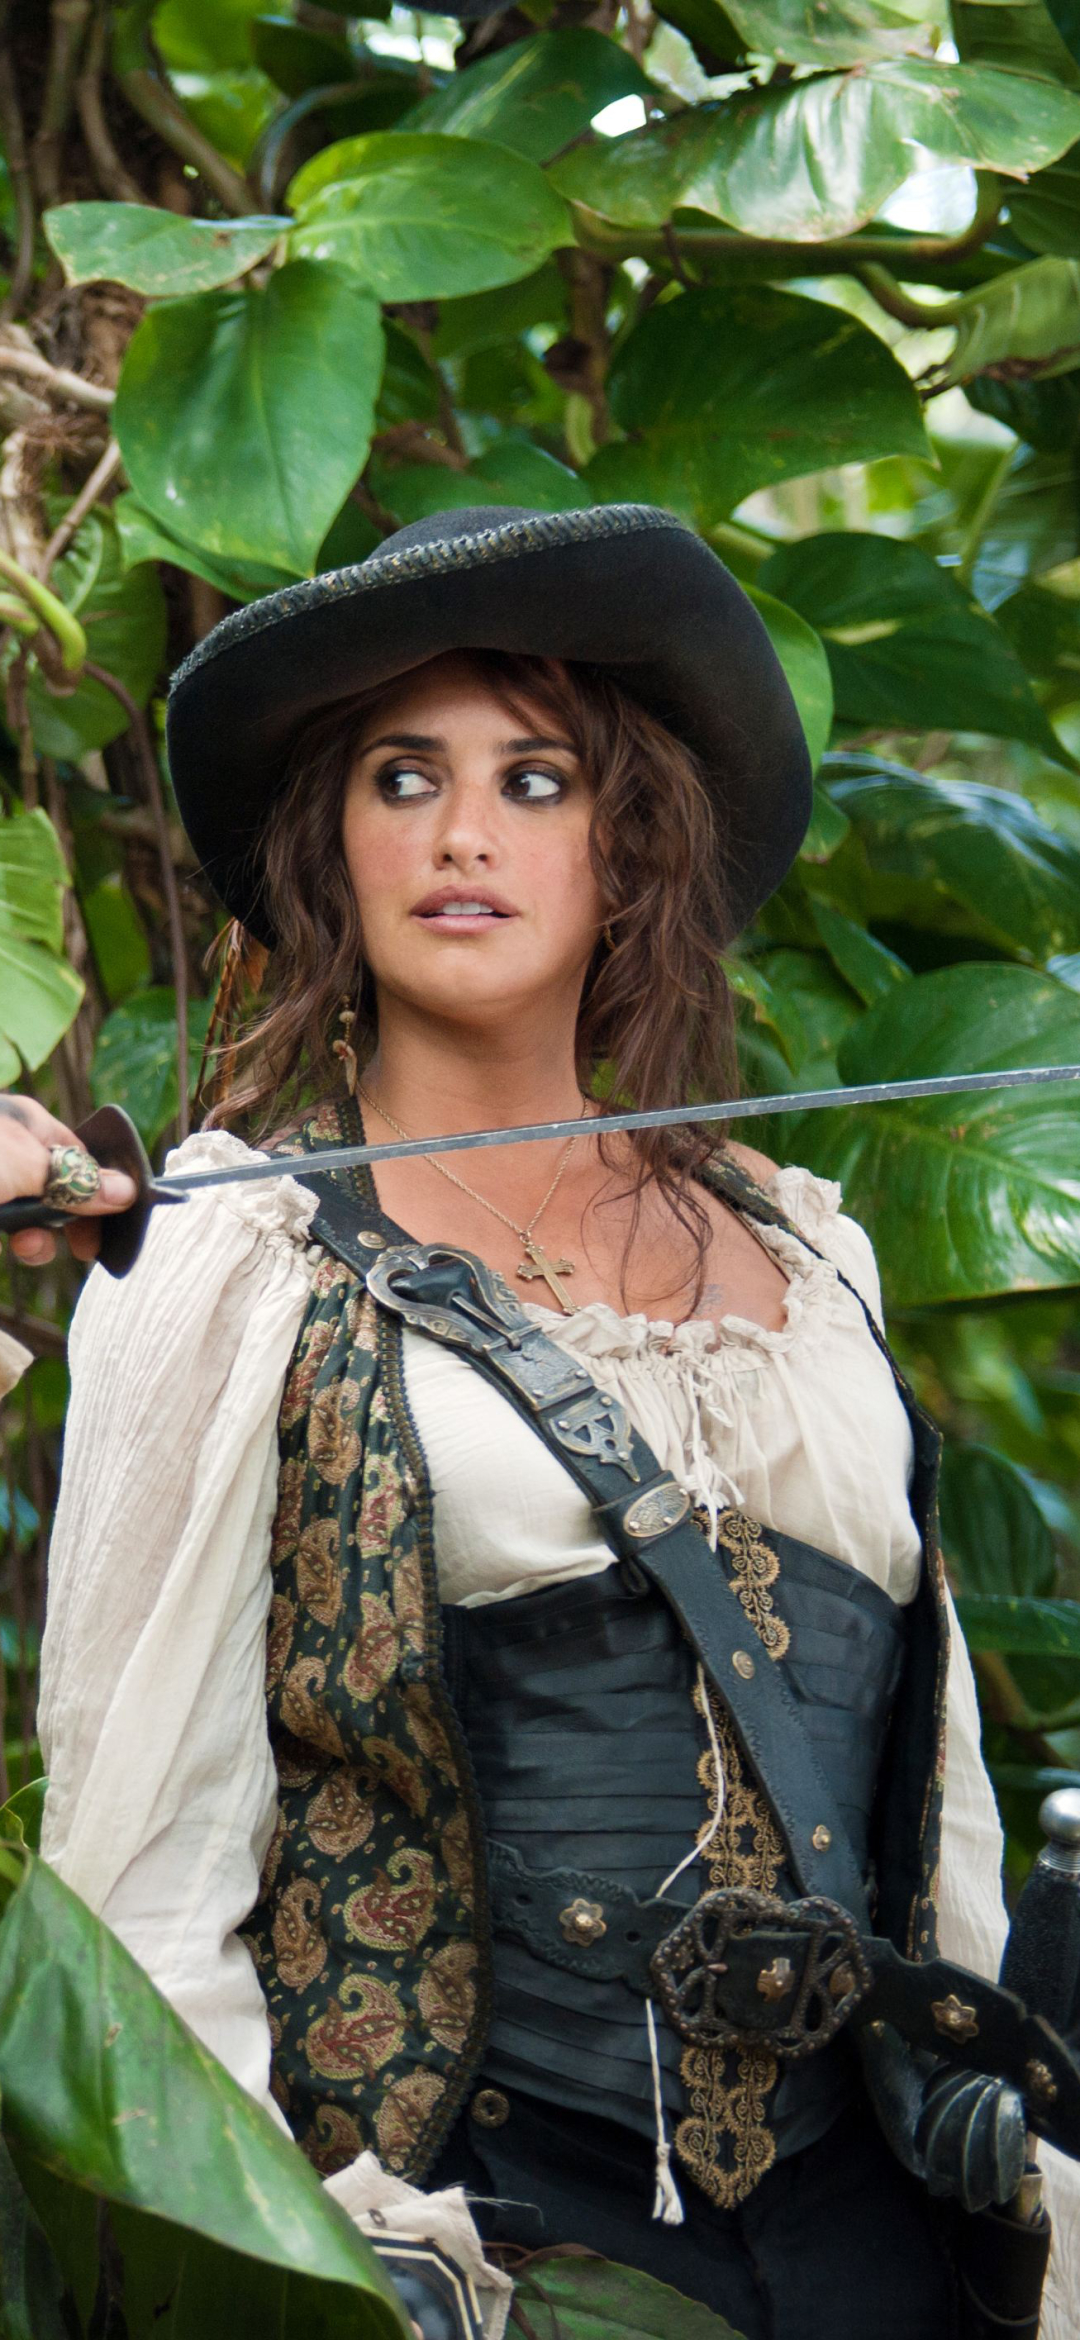 angelica teach, movie, pirates of the caribbean: on stranger tides, penelope cruz, pirates of the caribbean phone background